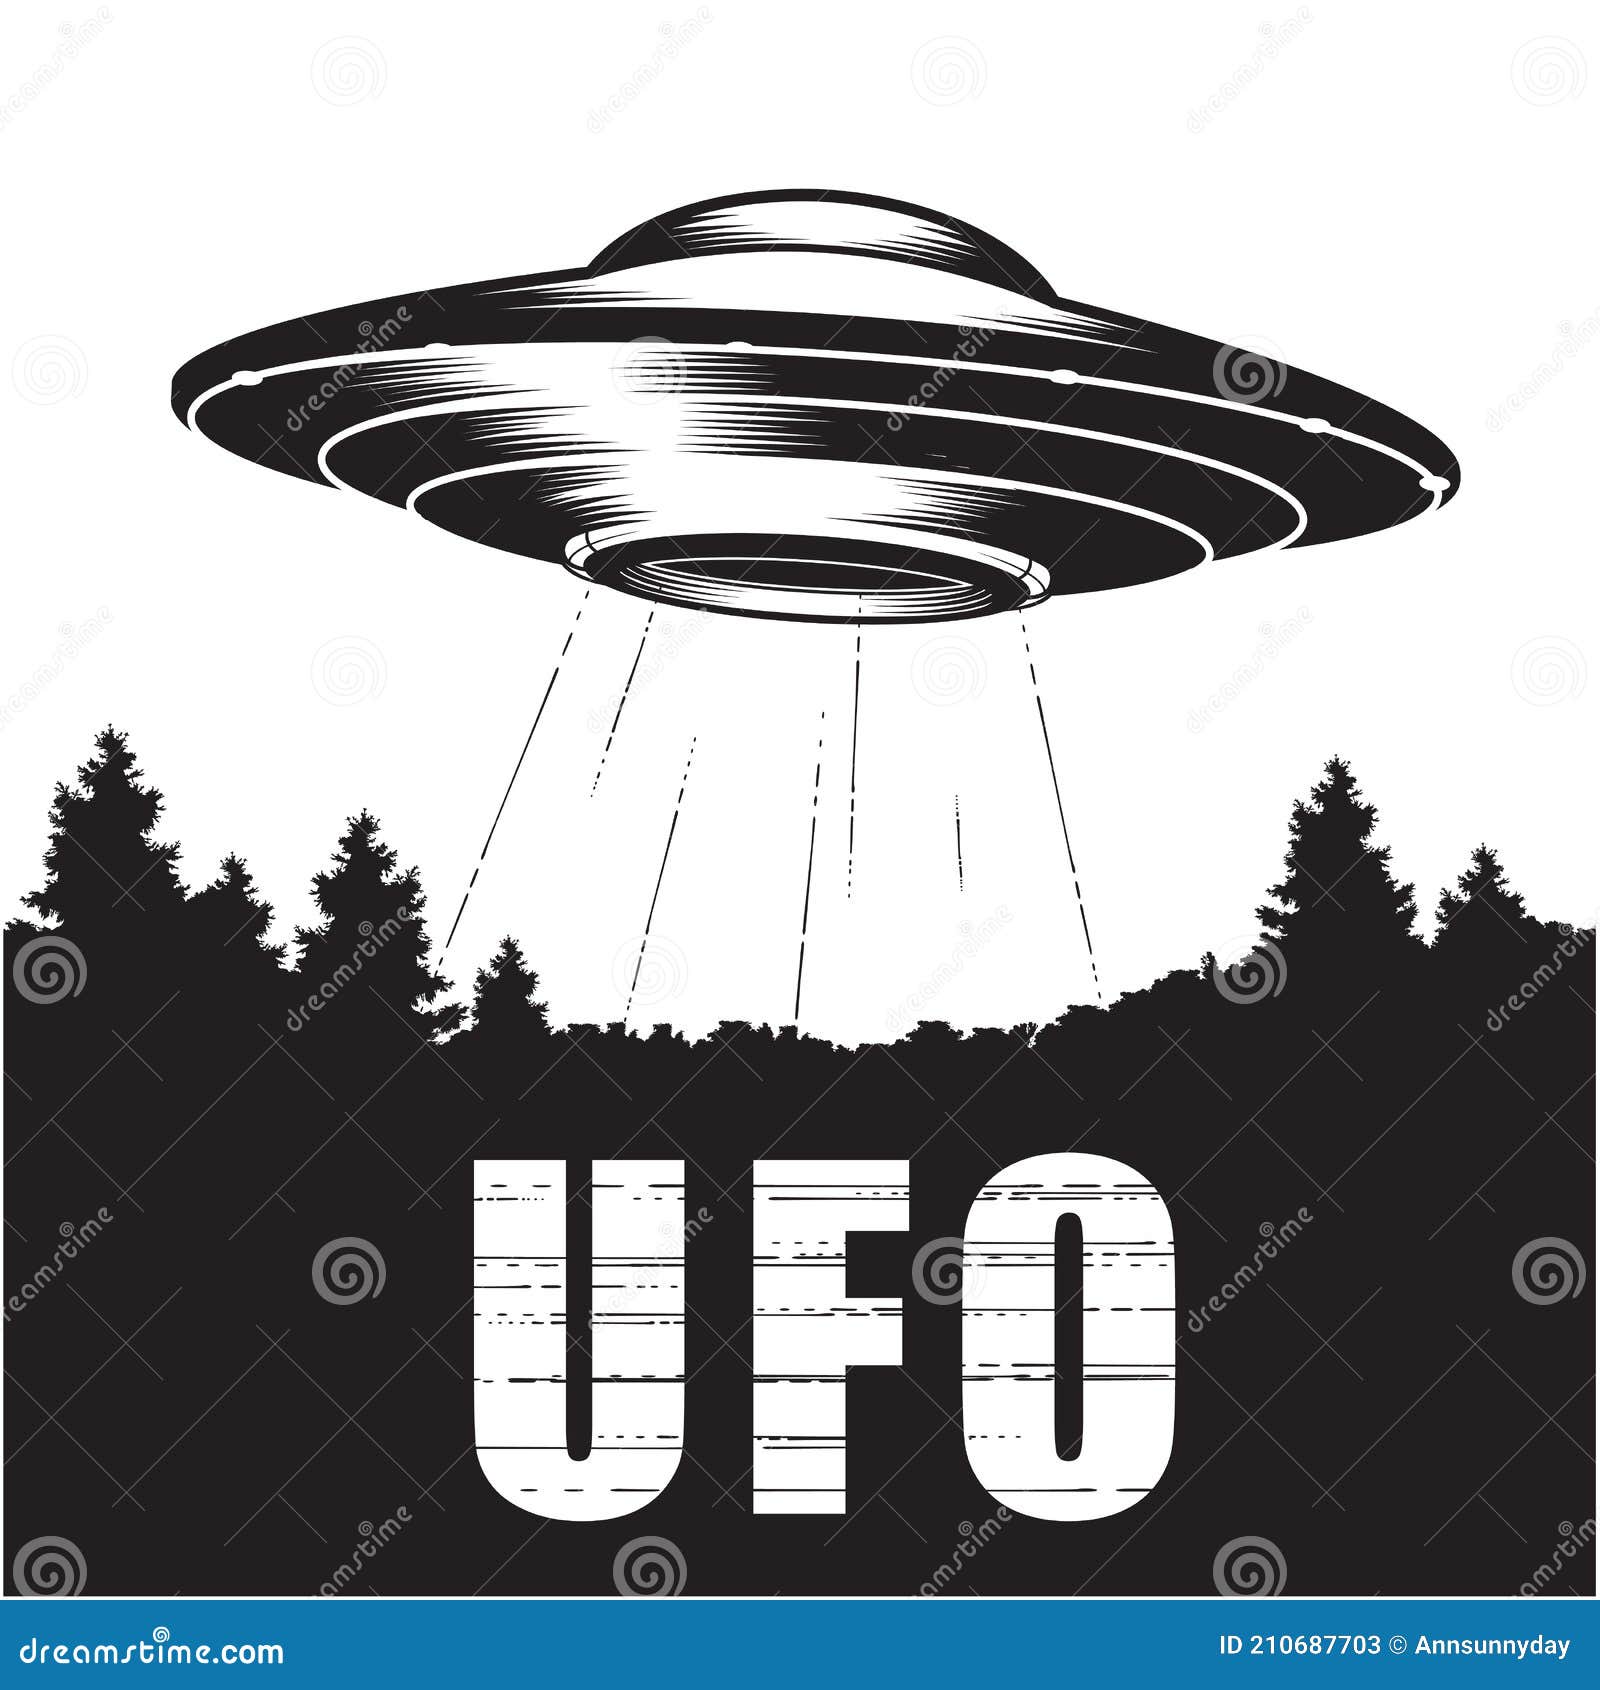 ufo over forest, alien space ship with ray of light, extraterrestrial flying saucer, ufo disk